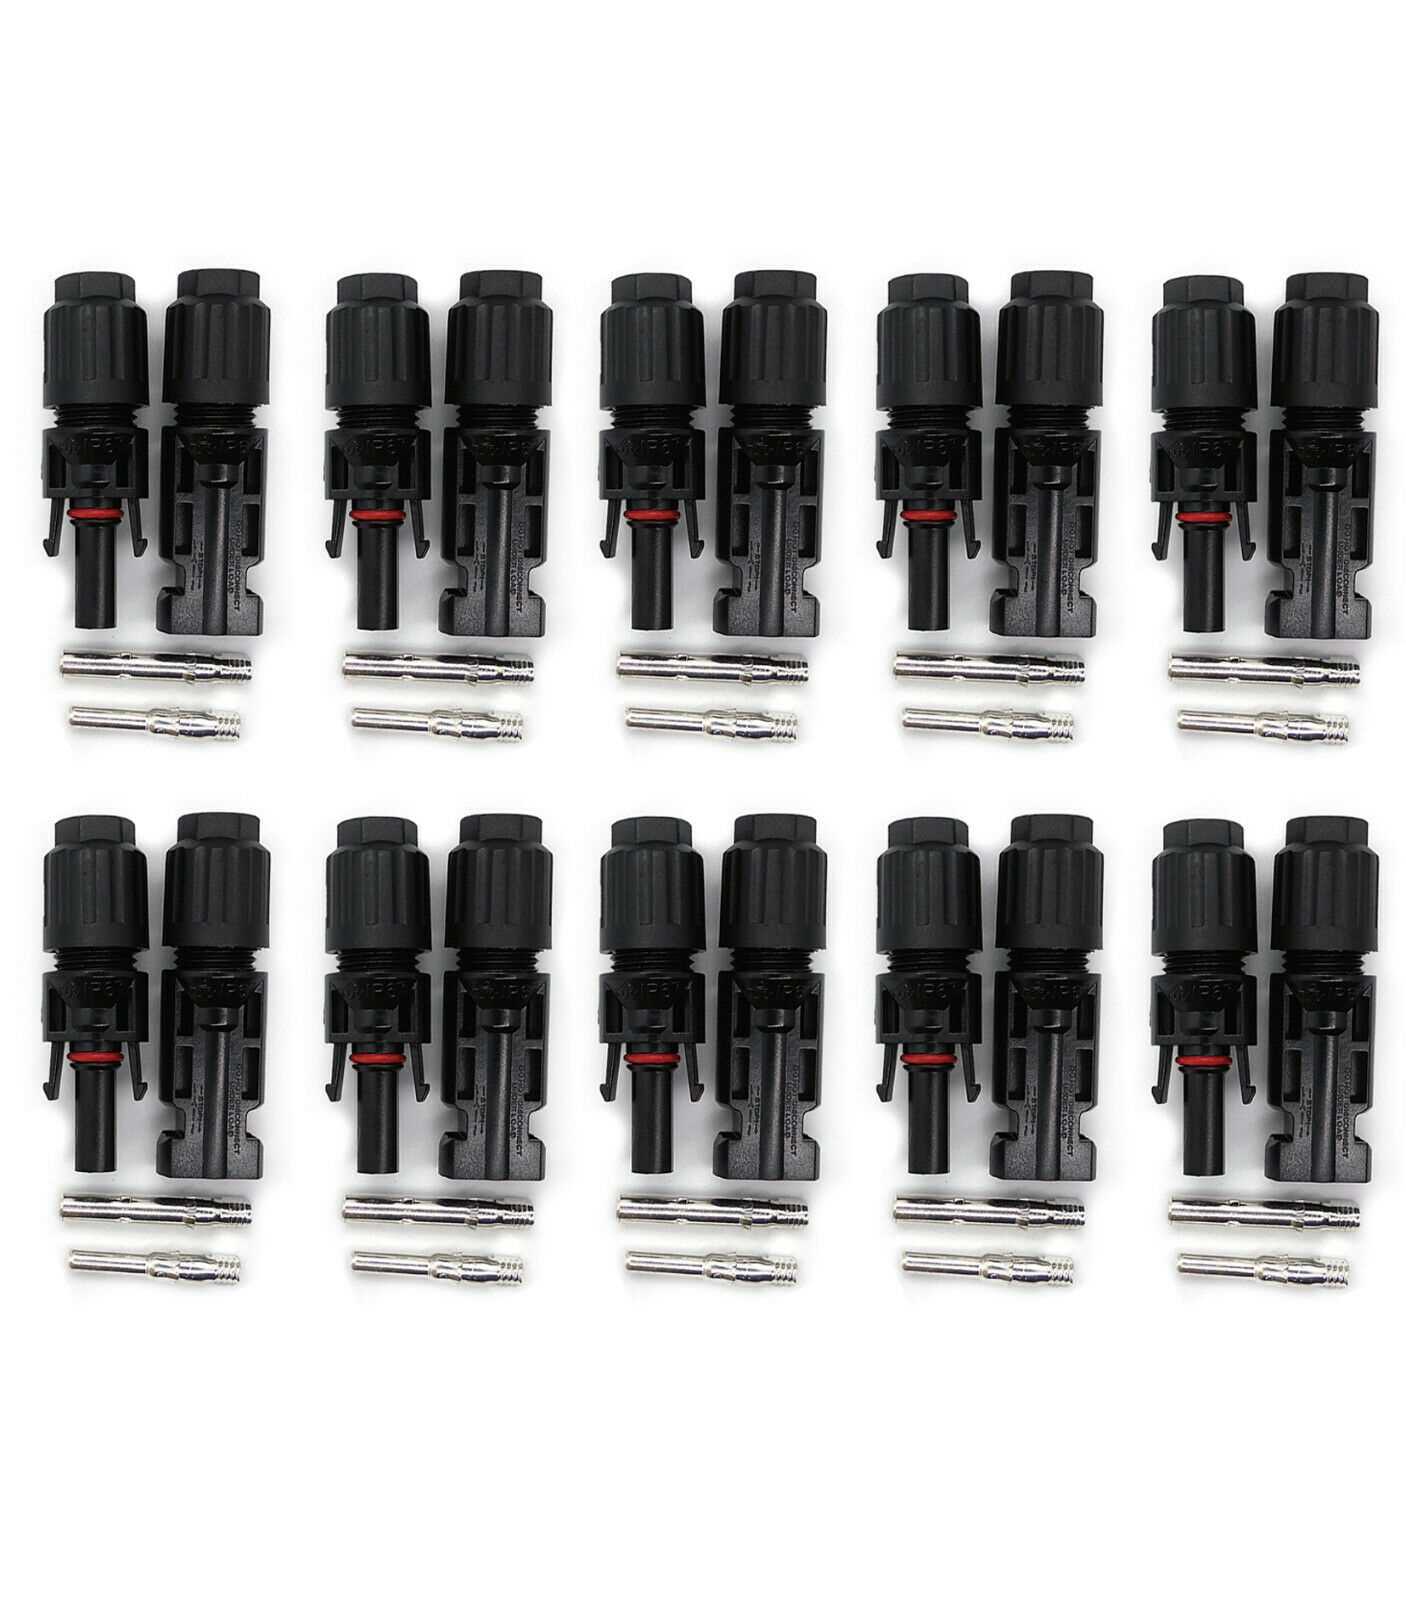 10 Pairs of Solar Panel Cable Connectors Male Female Compatible with MC4